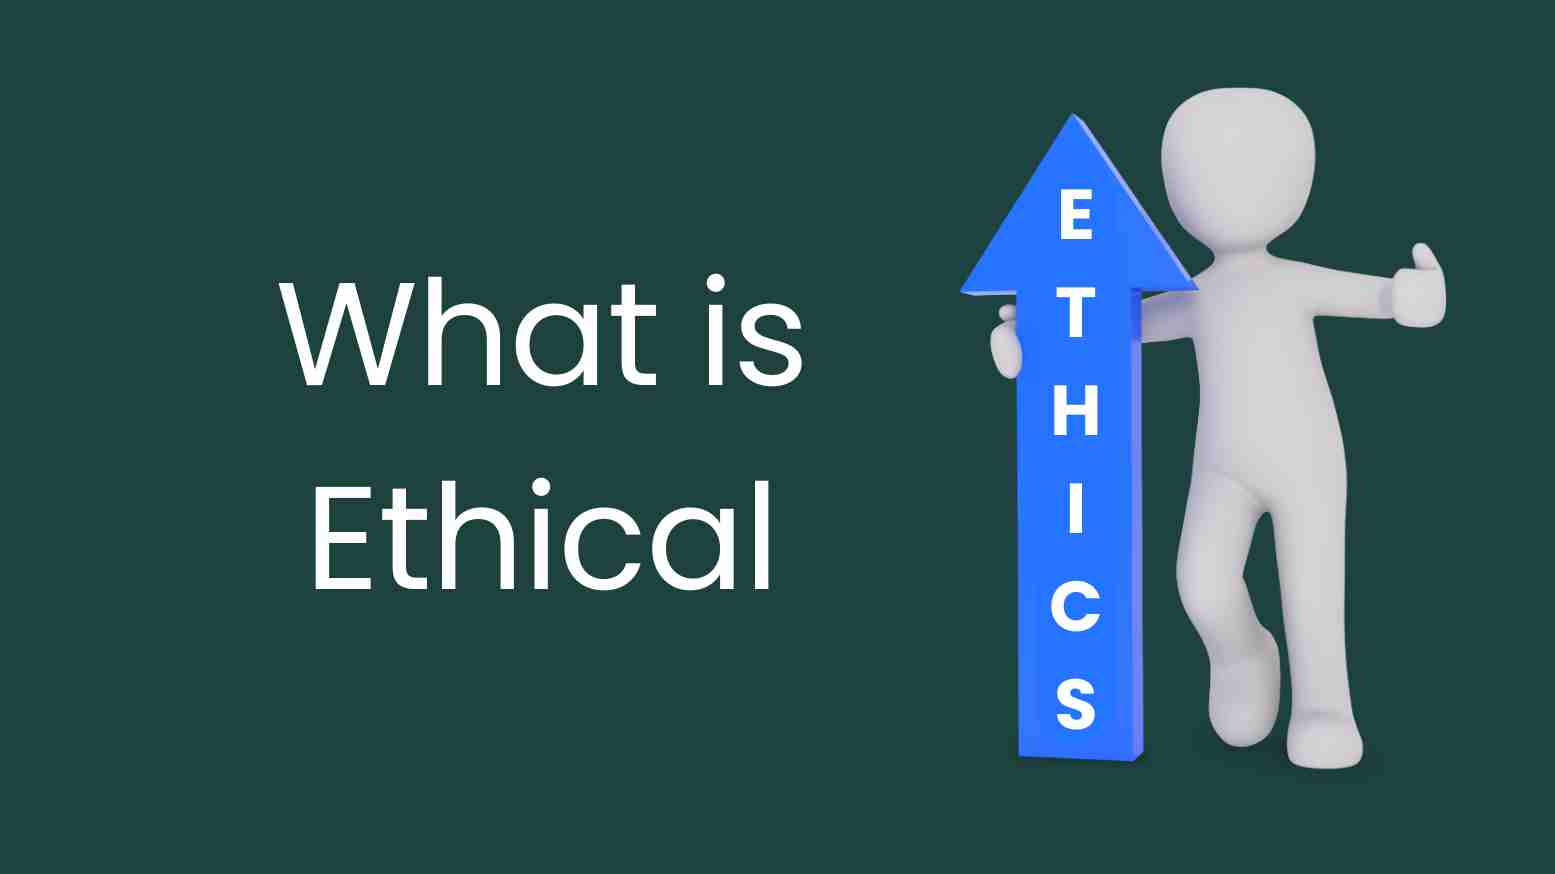 What is ethical